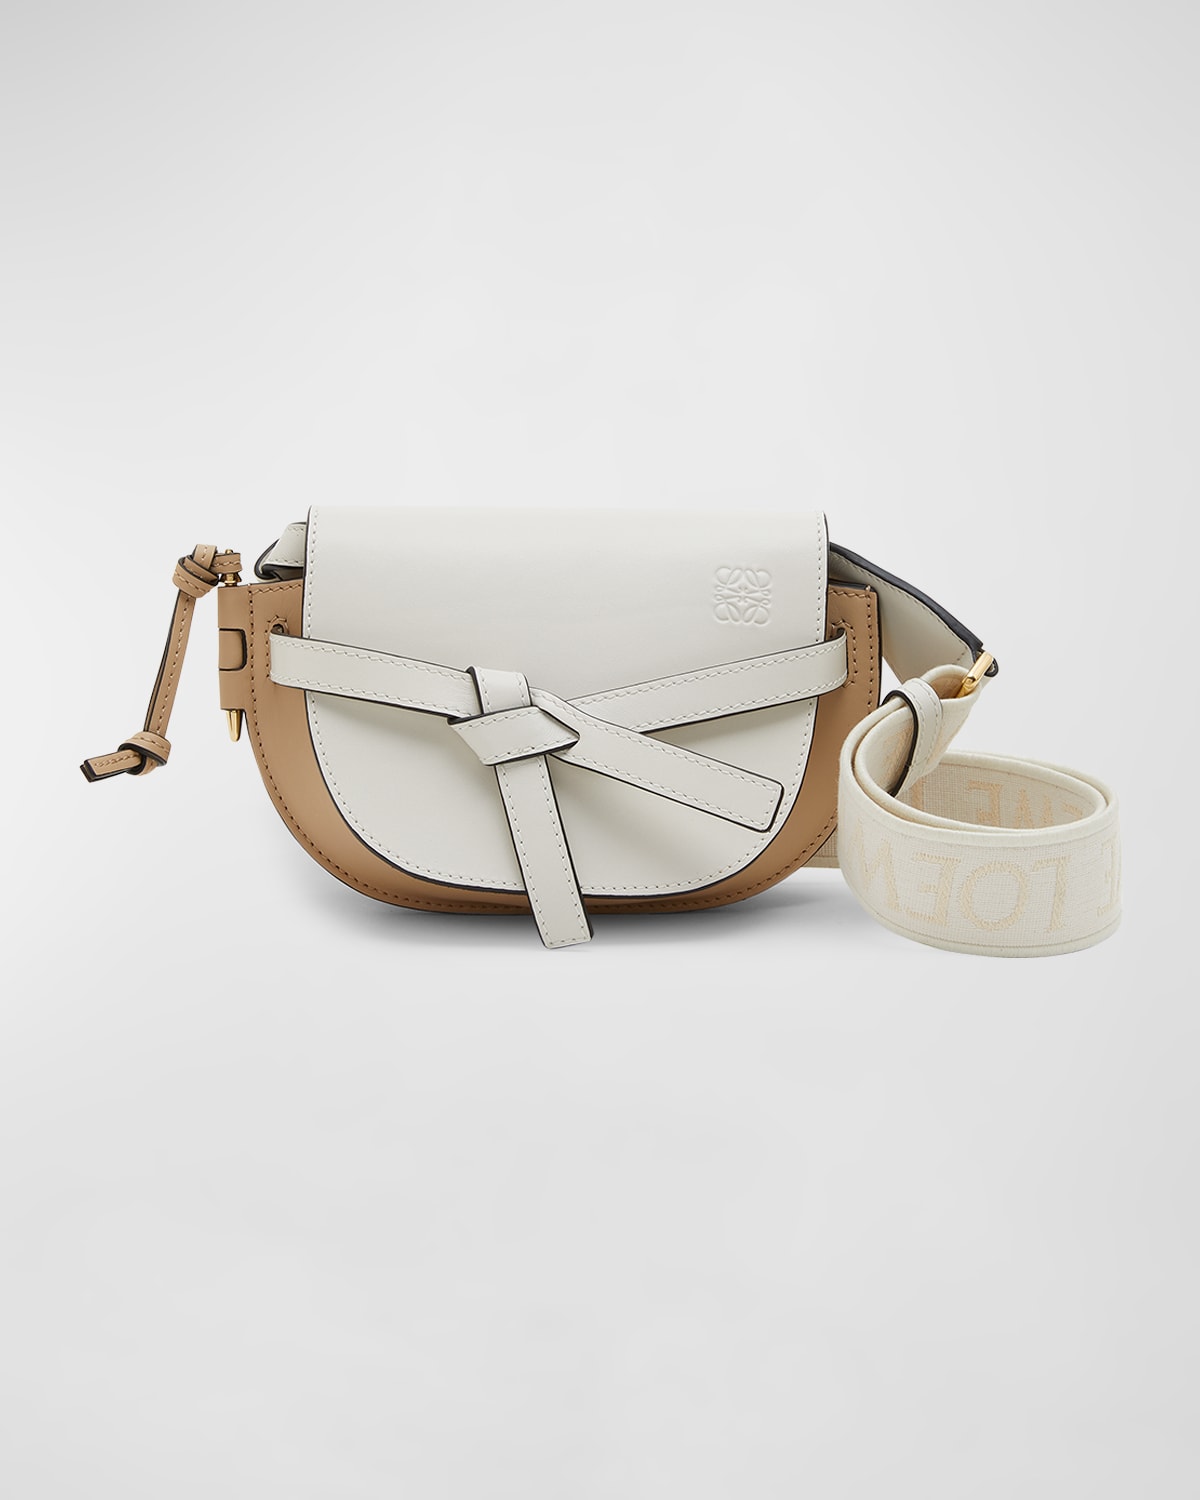 Gate Dual Mini Crossbody Bag in Bicolor Leather with Jacquard Strap